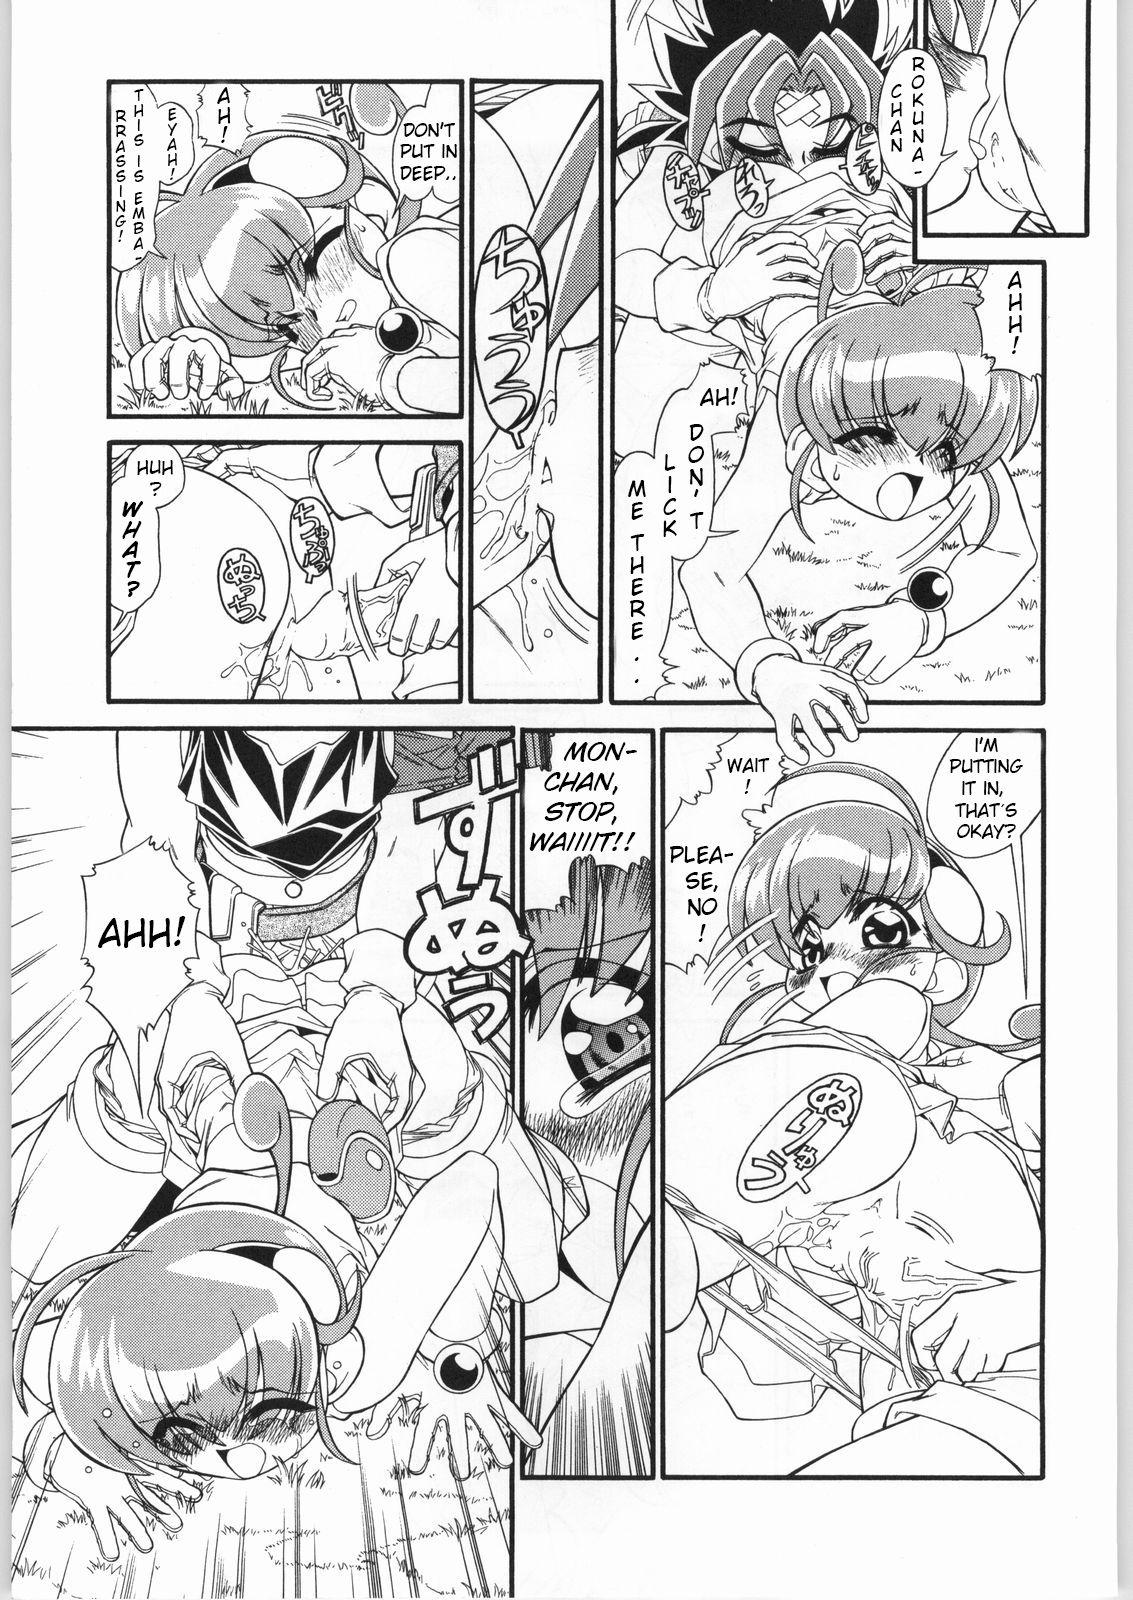 Assfucking M.F.H.H.MN REVISE - Mon colle knights Blow Job - Page 4